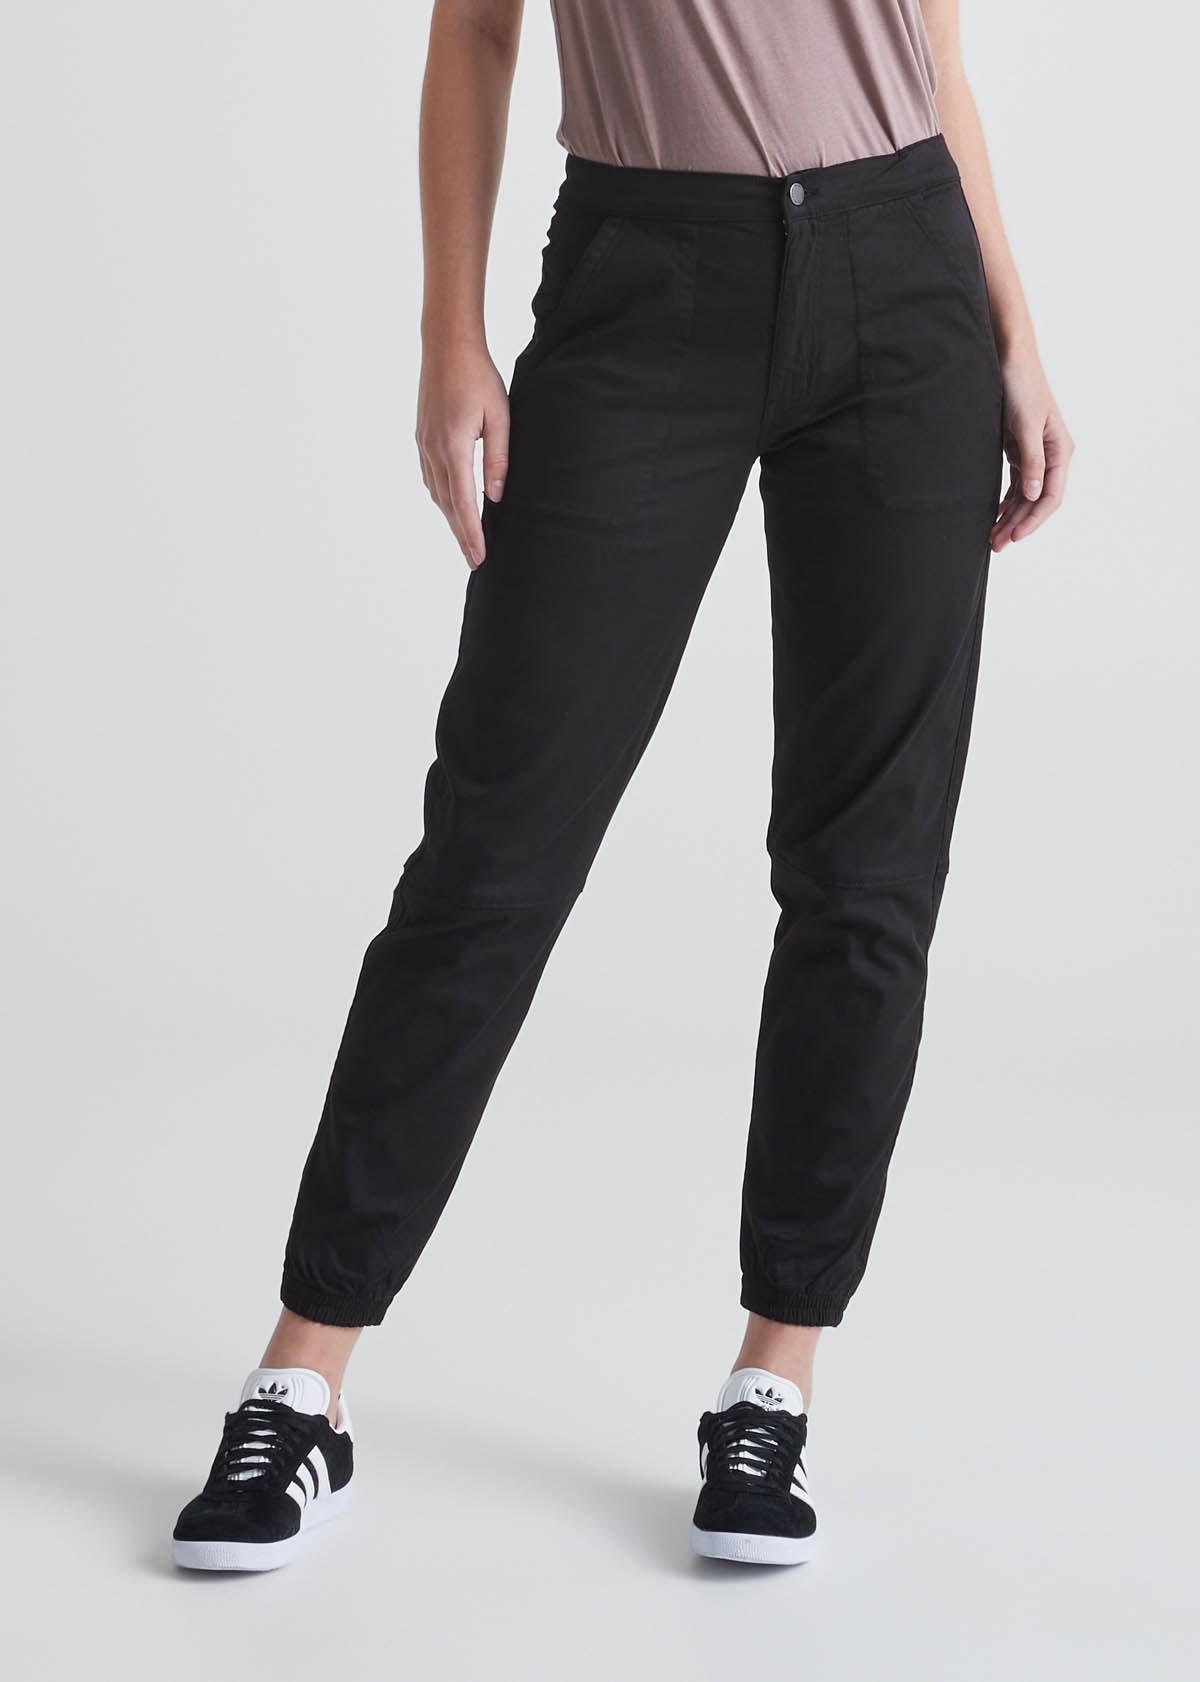 Women's High Rise Black Athletic Jogger Front